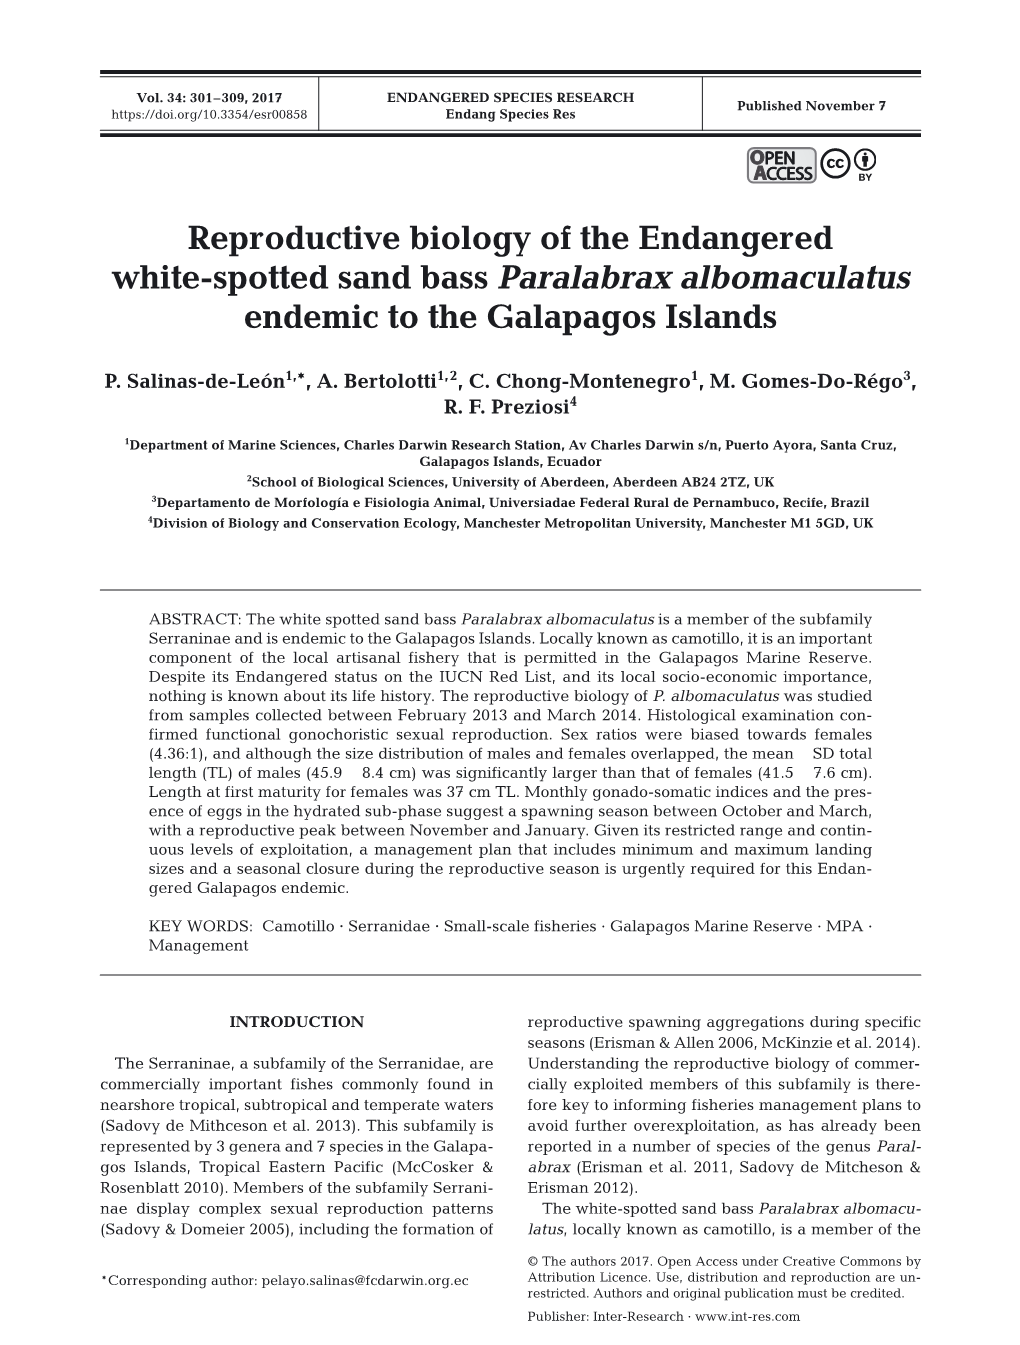 Reproductive Biology of the Endangered White‑Spotted Sand